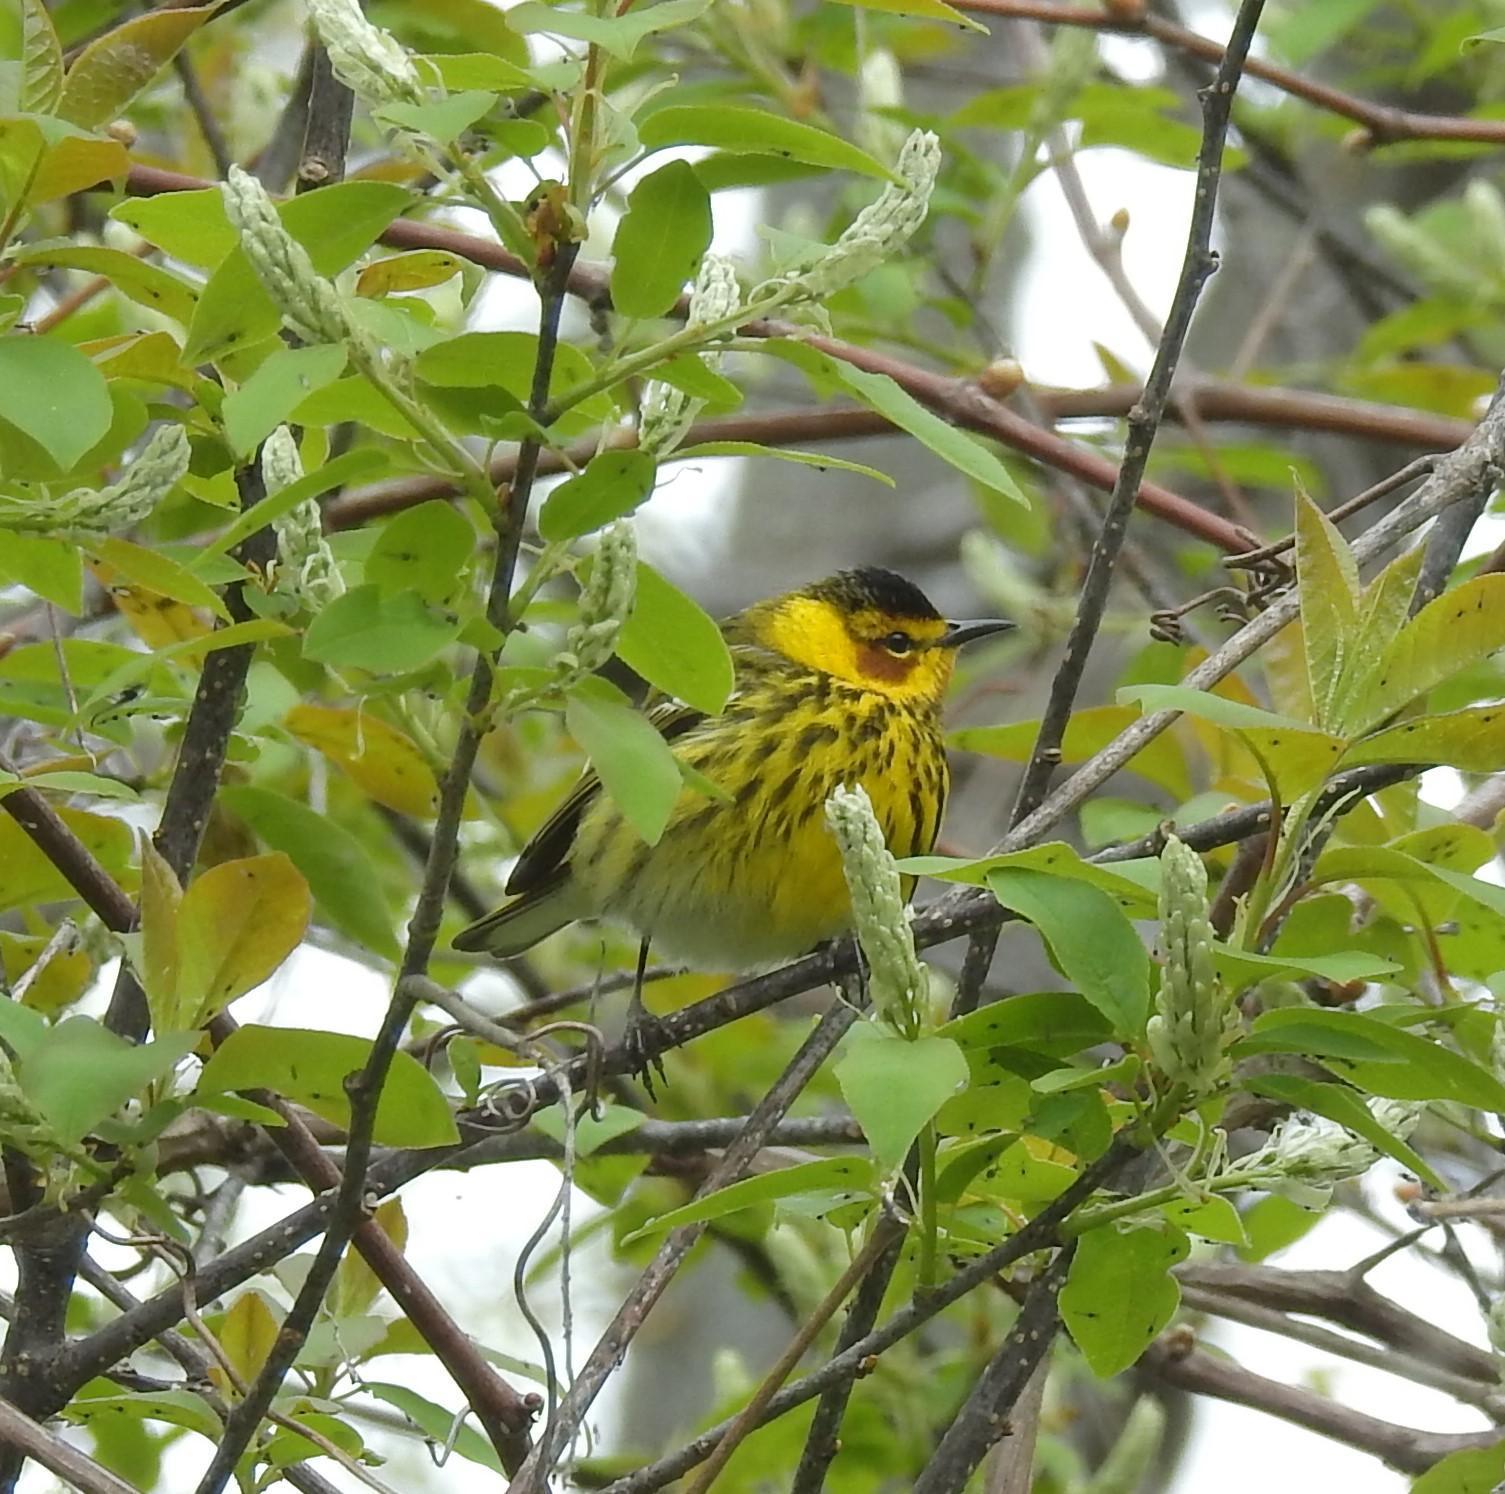 Cape May Warbler Photo by John Licharson